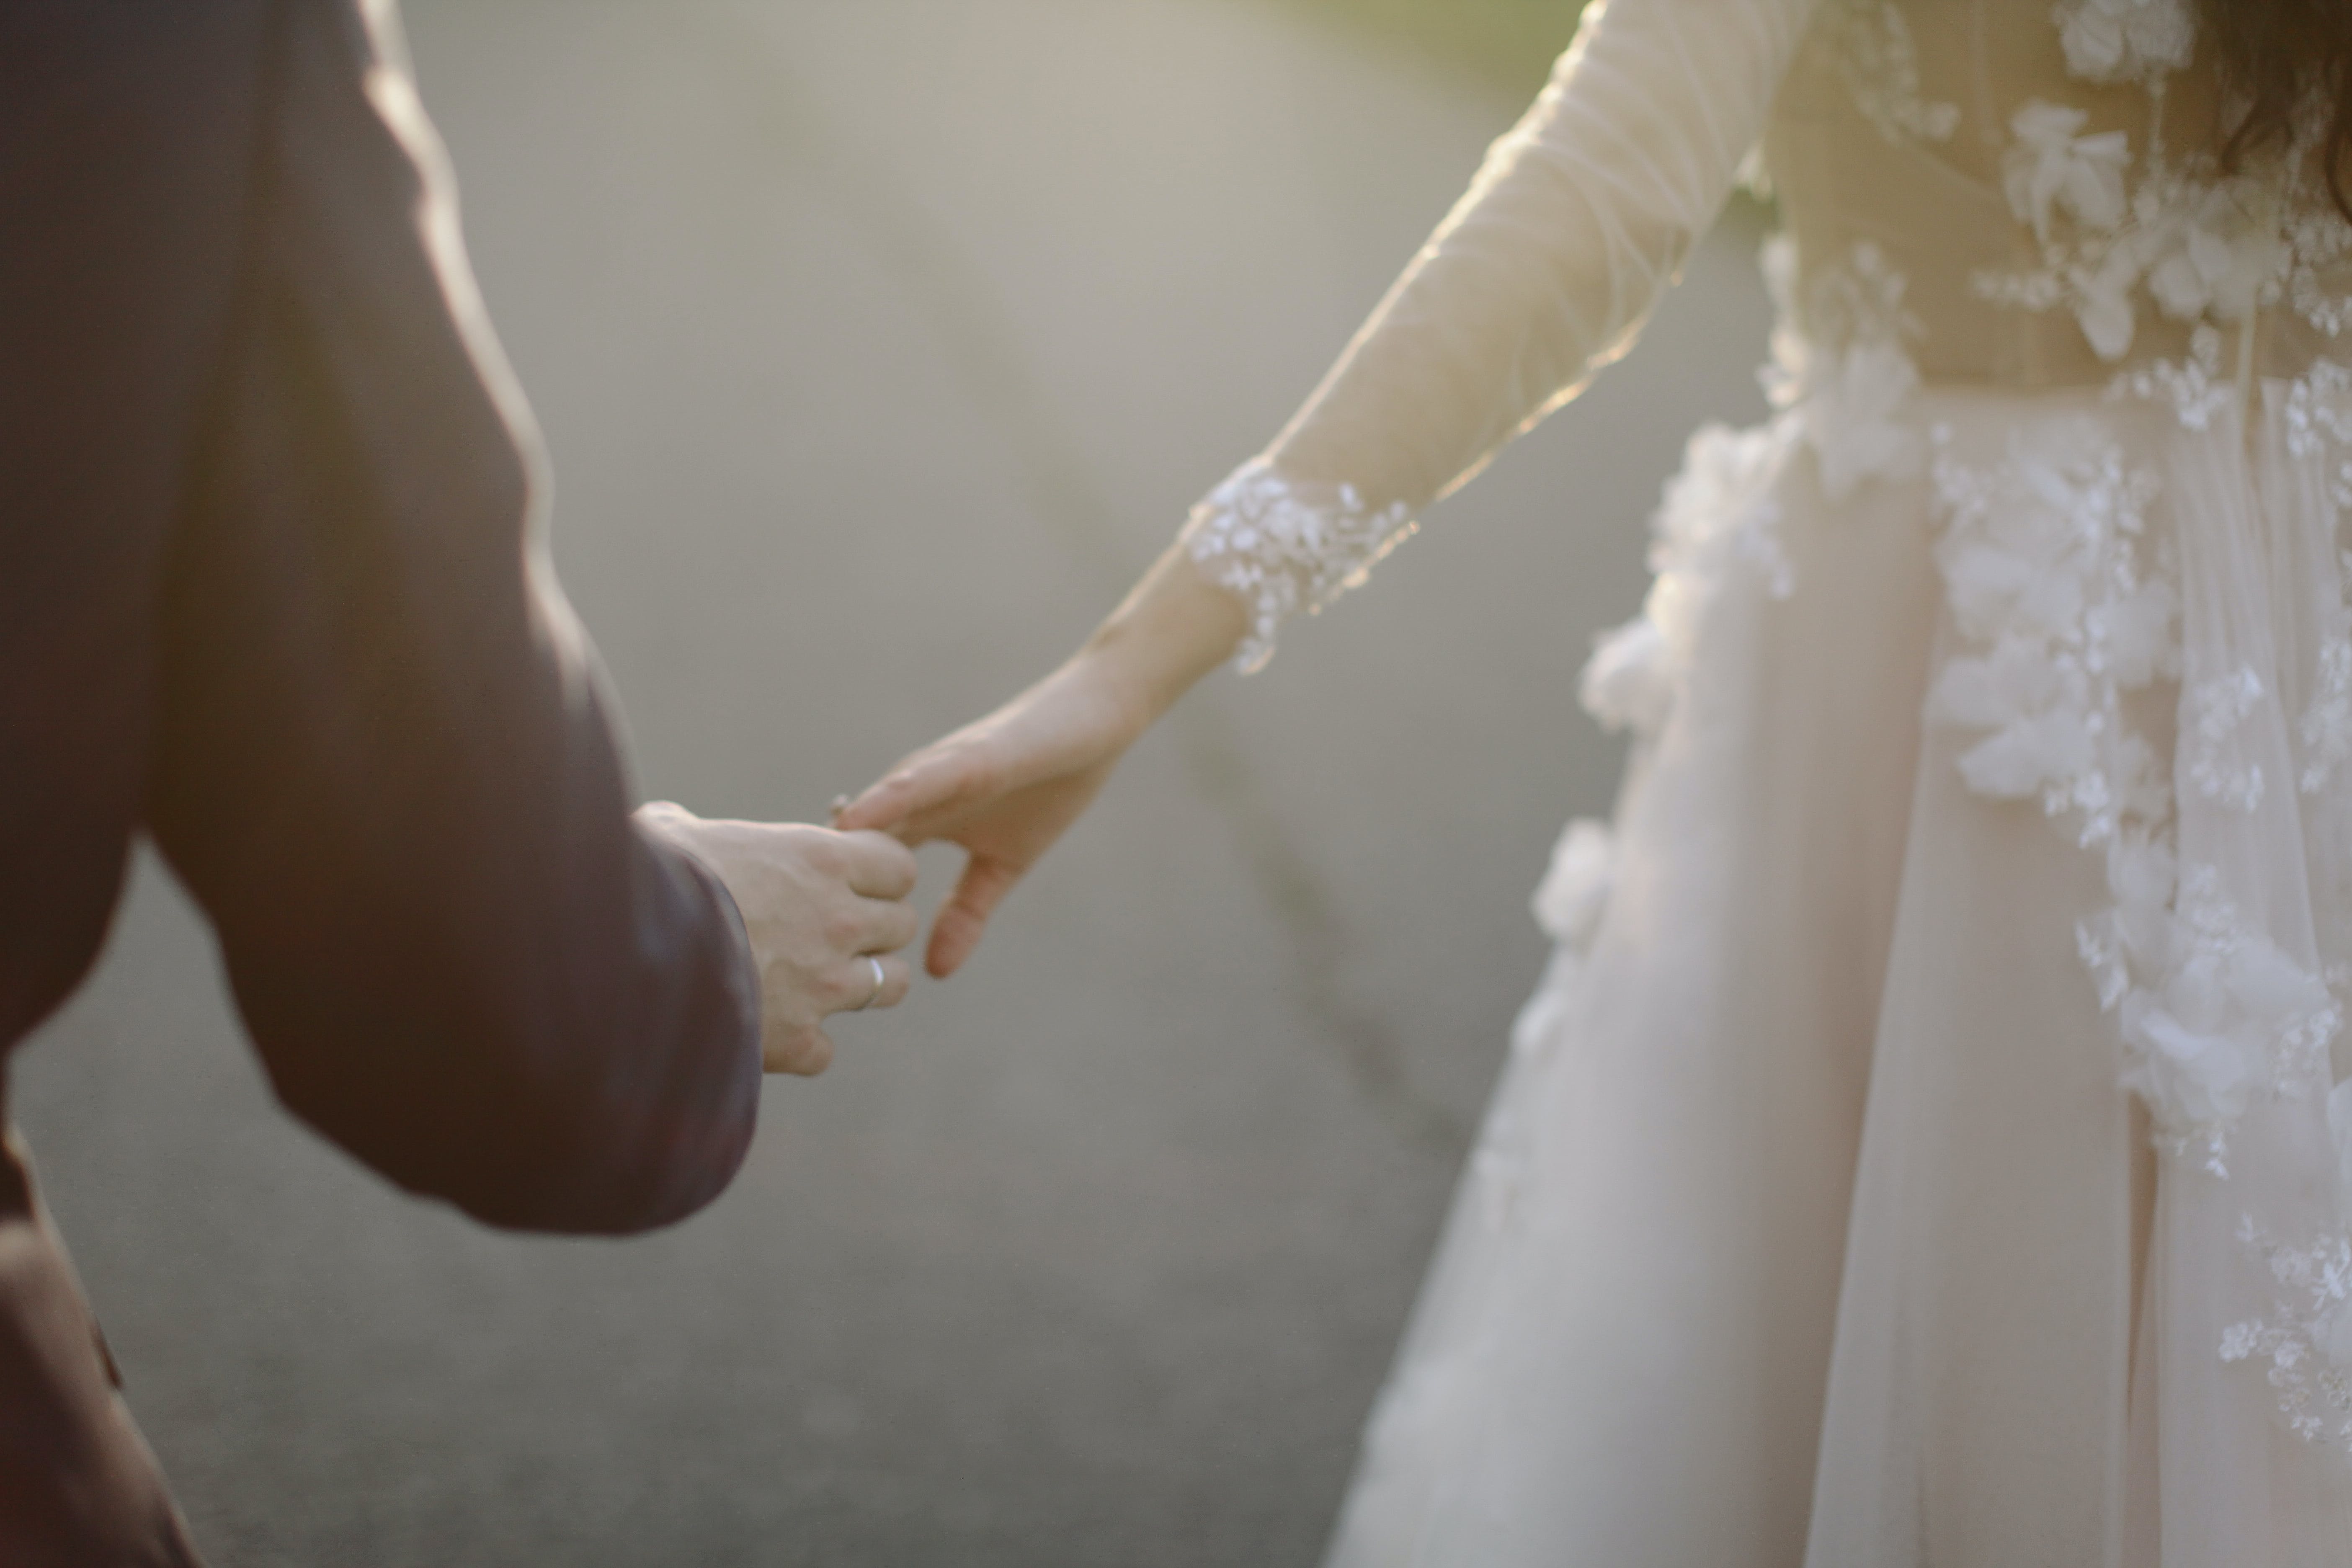 A bride and groom touching hands | Source: Pexels